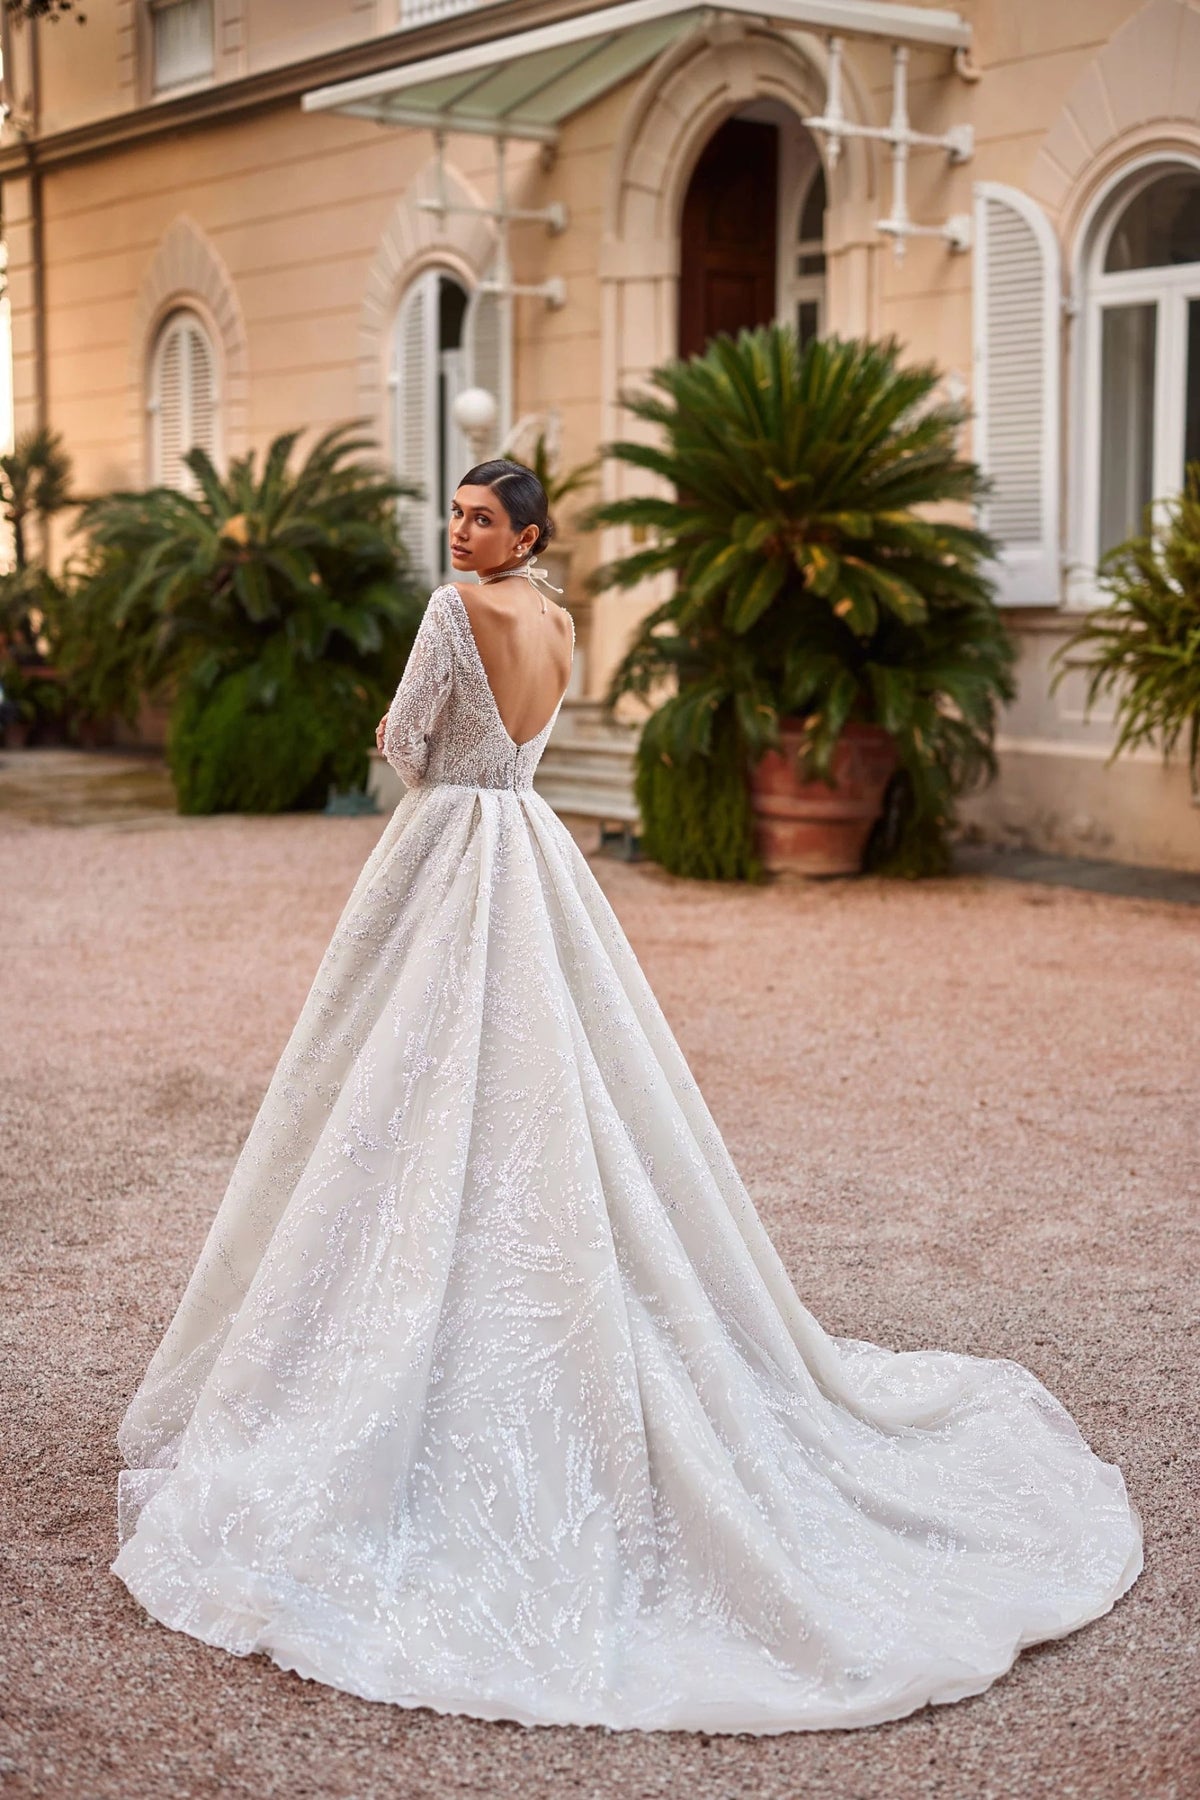 Stunning Aline Long Illusion Sleeves Translucent Bodice Sweetheart Neckline Pearl Wedding Dress Bridal Gown Sparkle Fabric